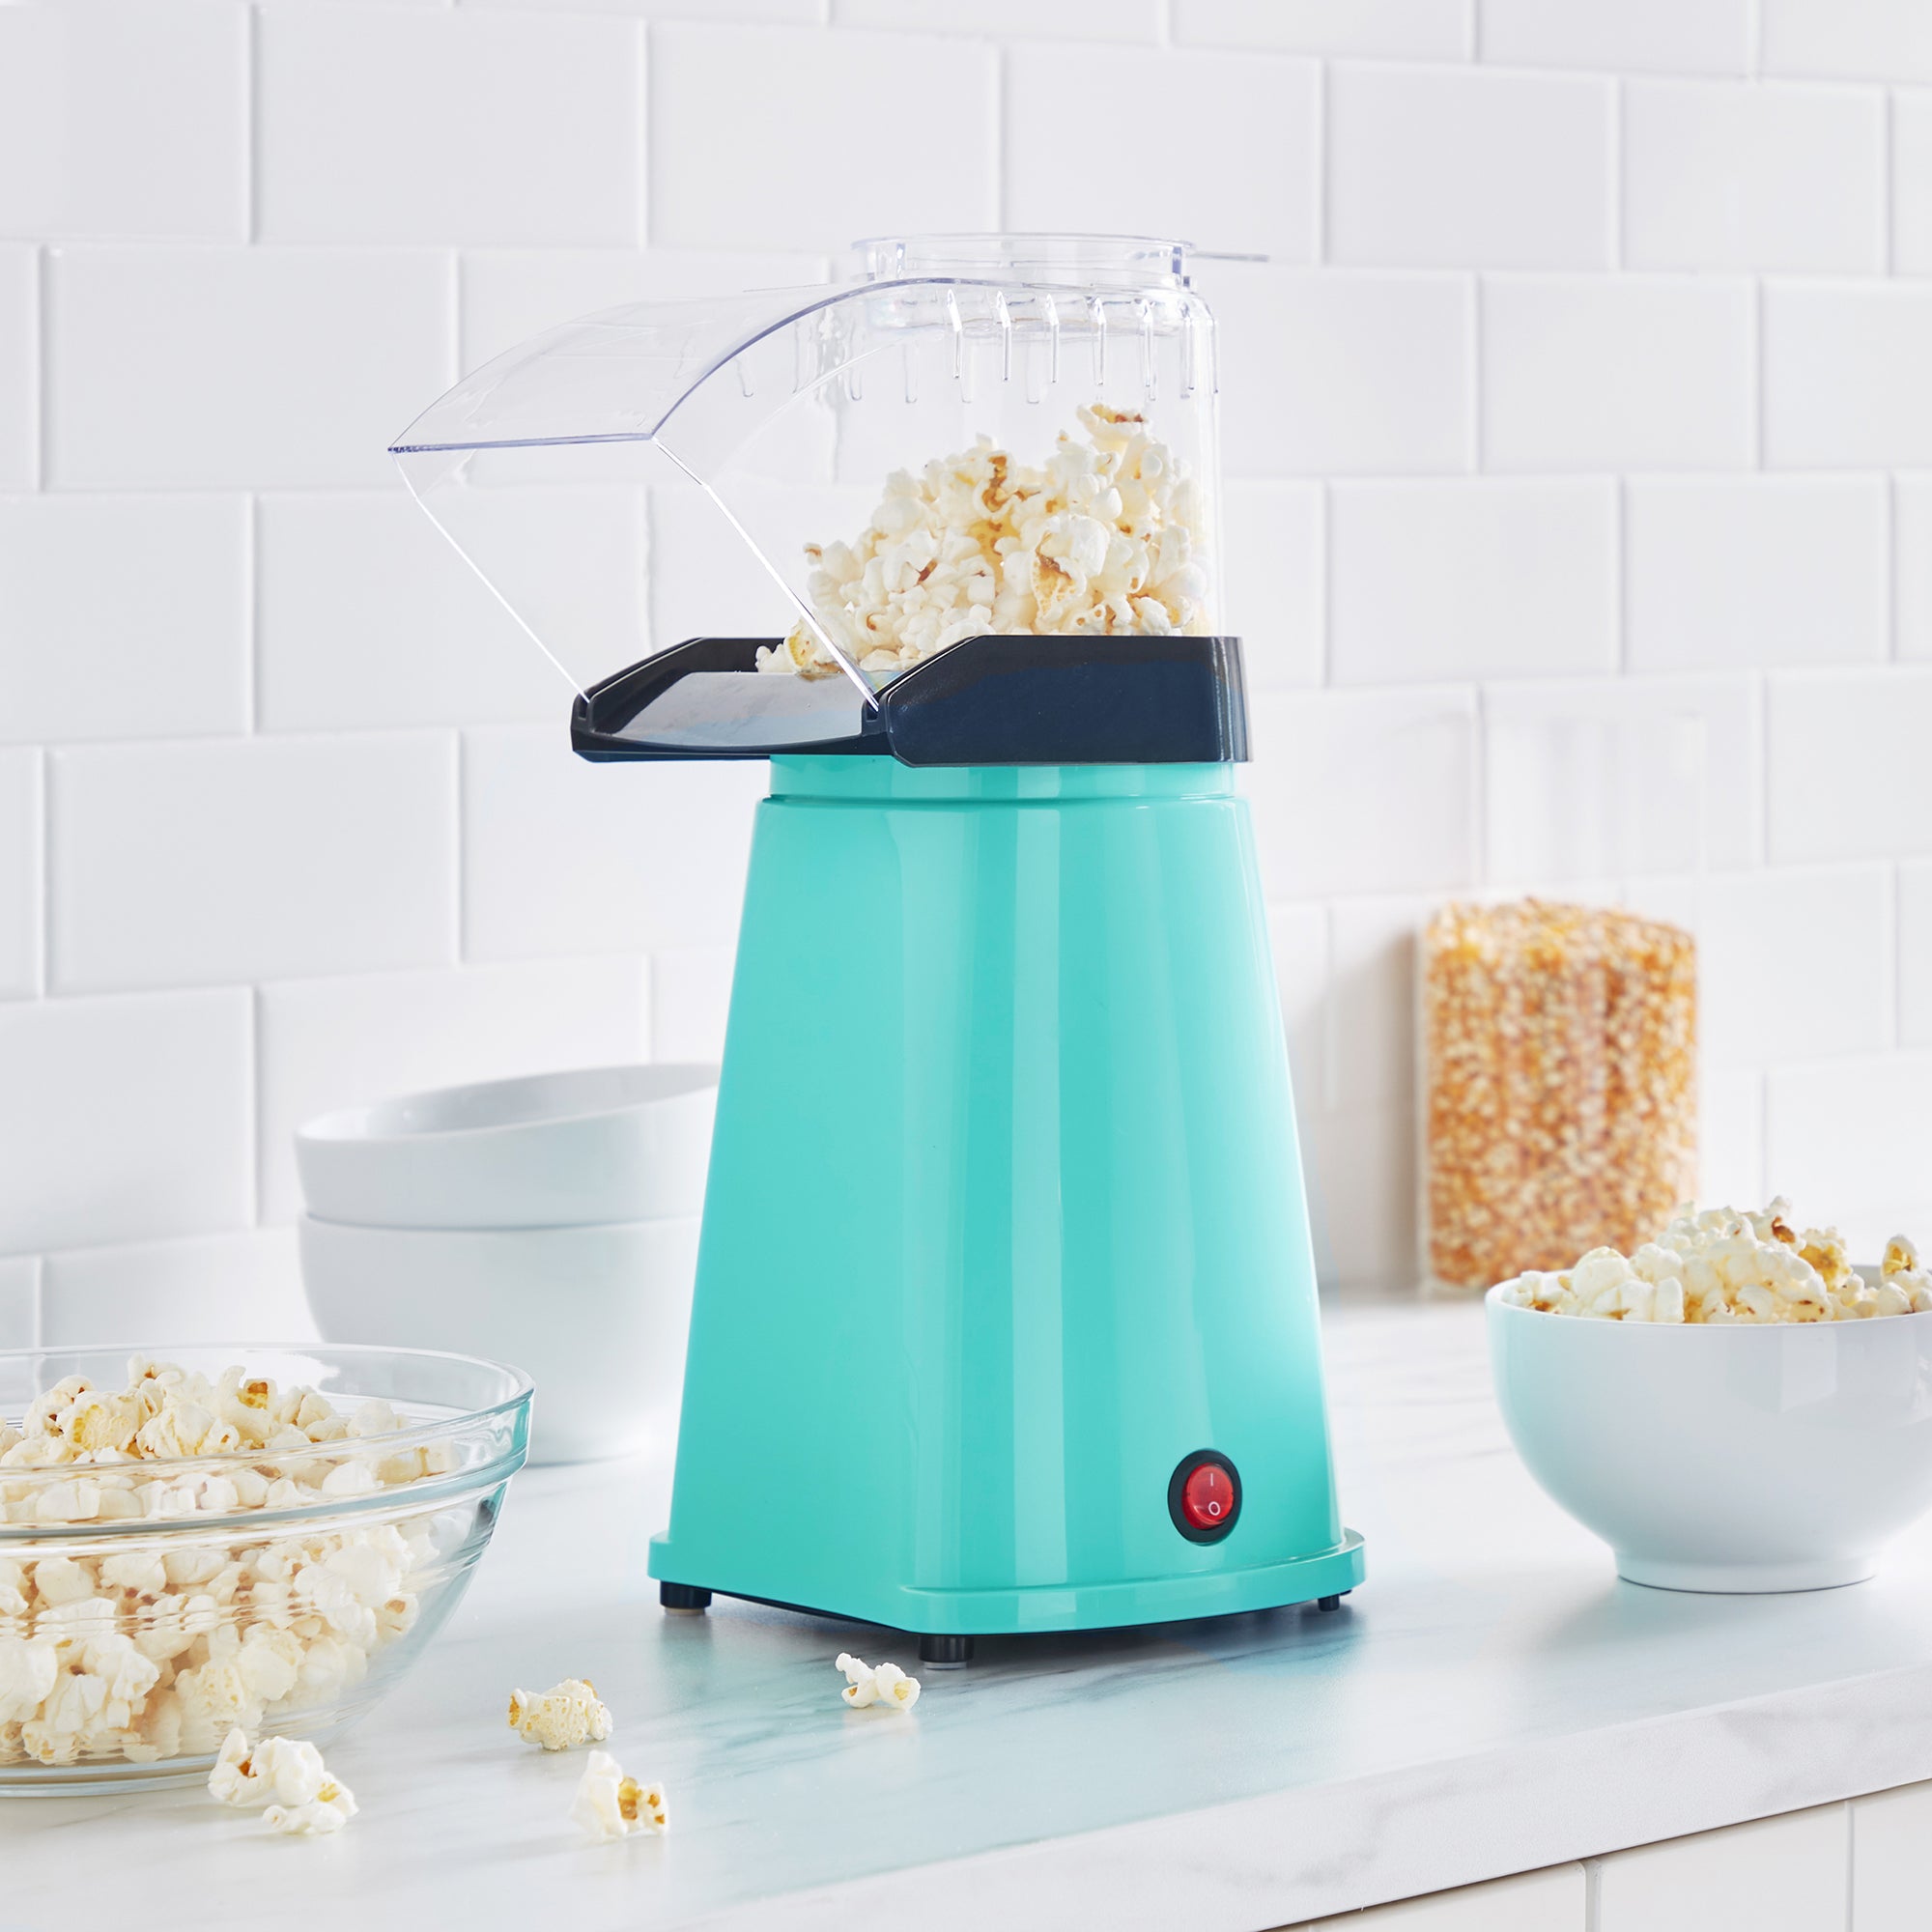 Electric Kernel Corn Maker Buy at Best Price- 5 Core